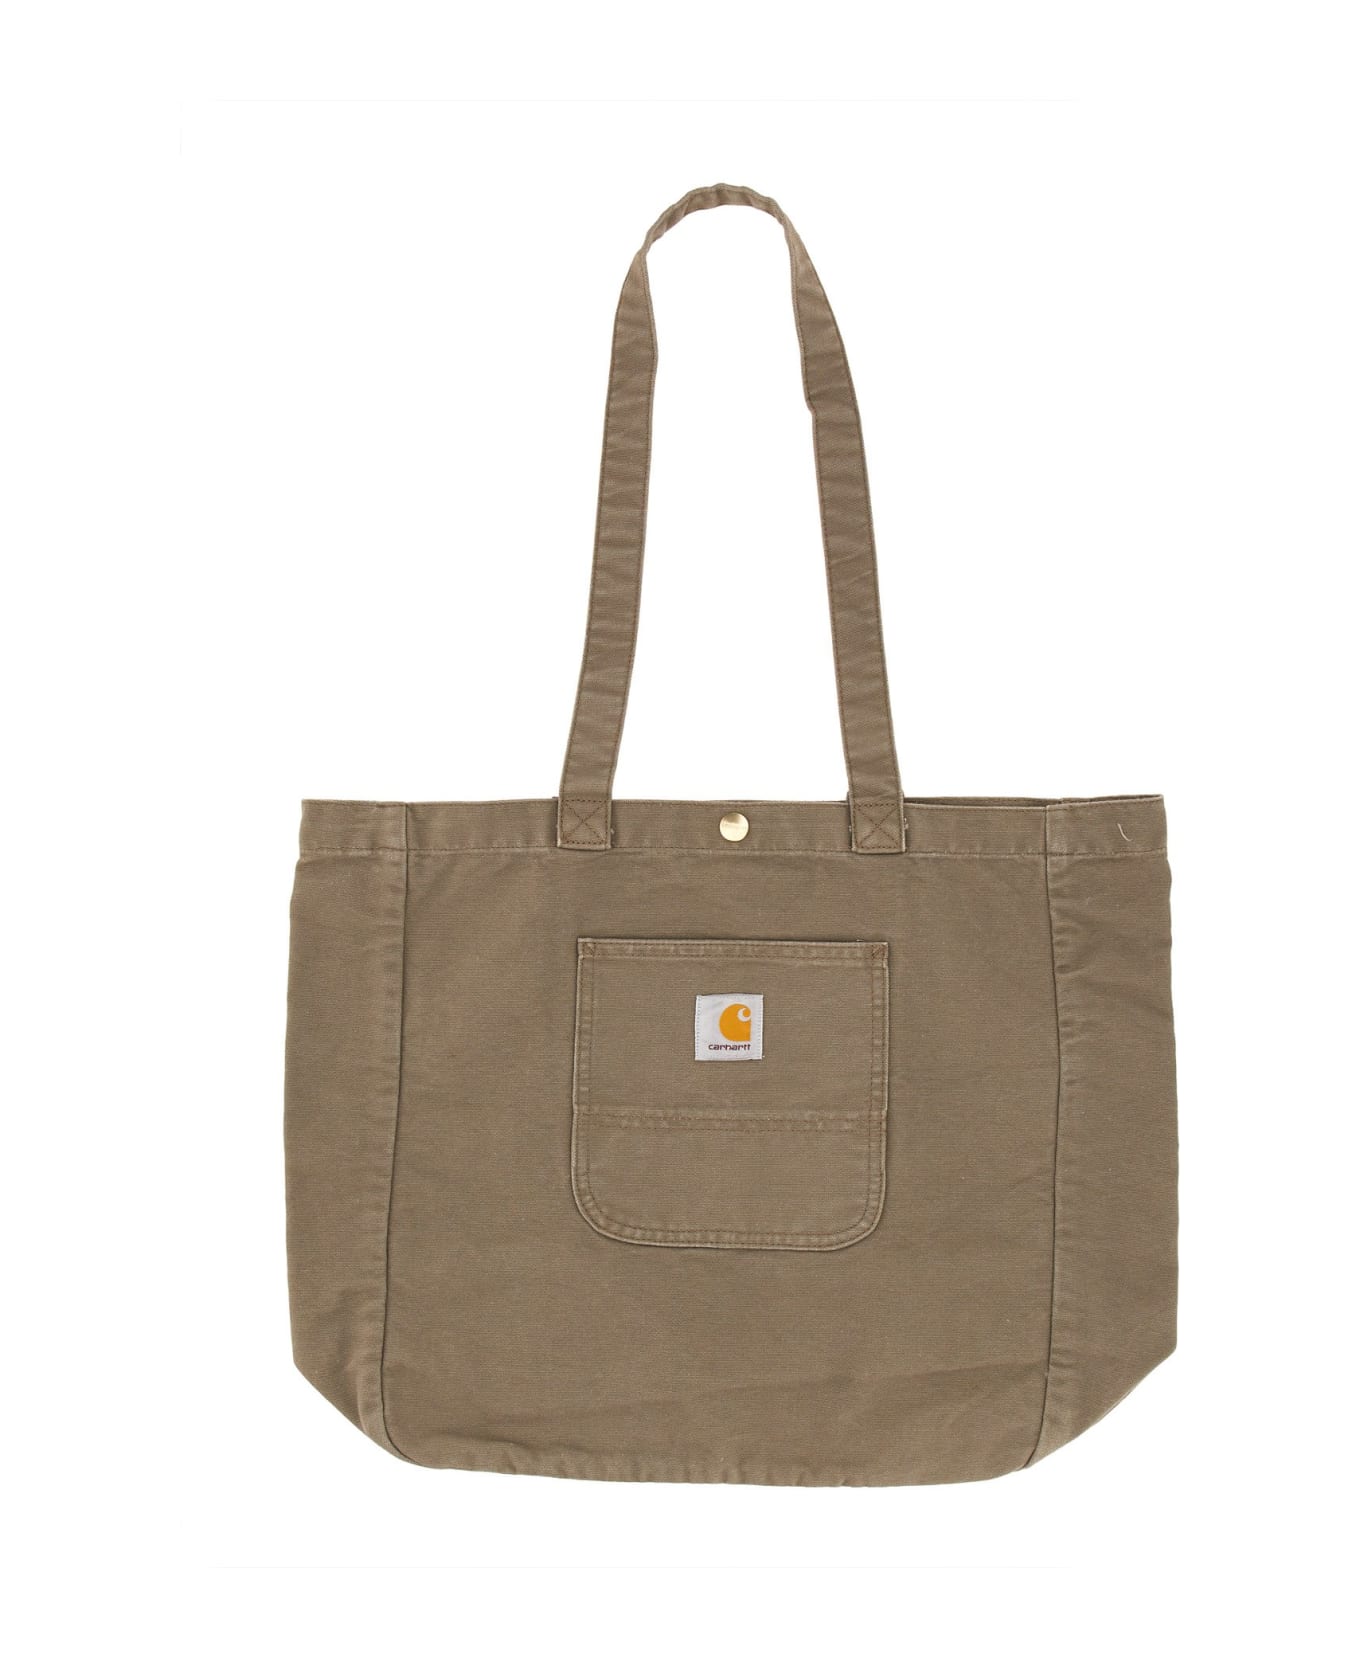 Carhartt Tote Bag With Logo - Barista stone washed